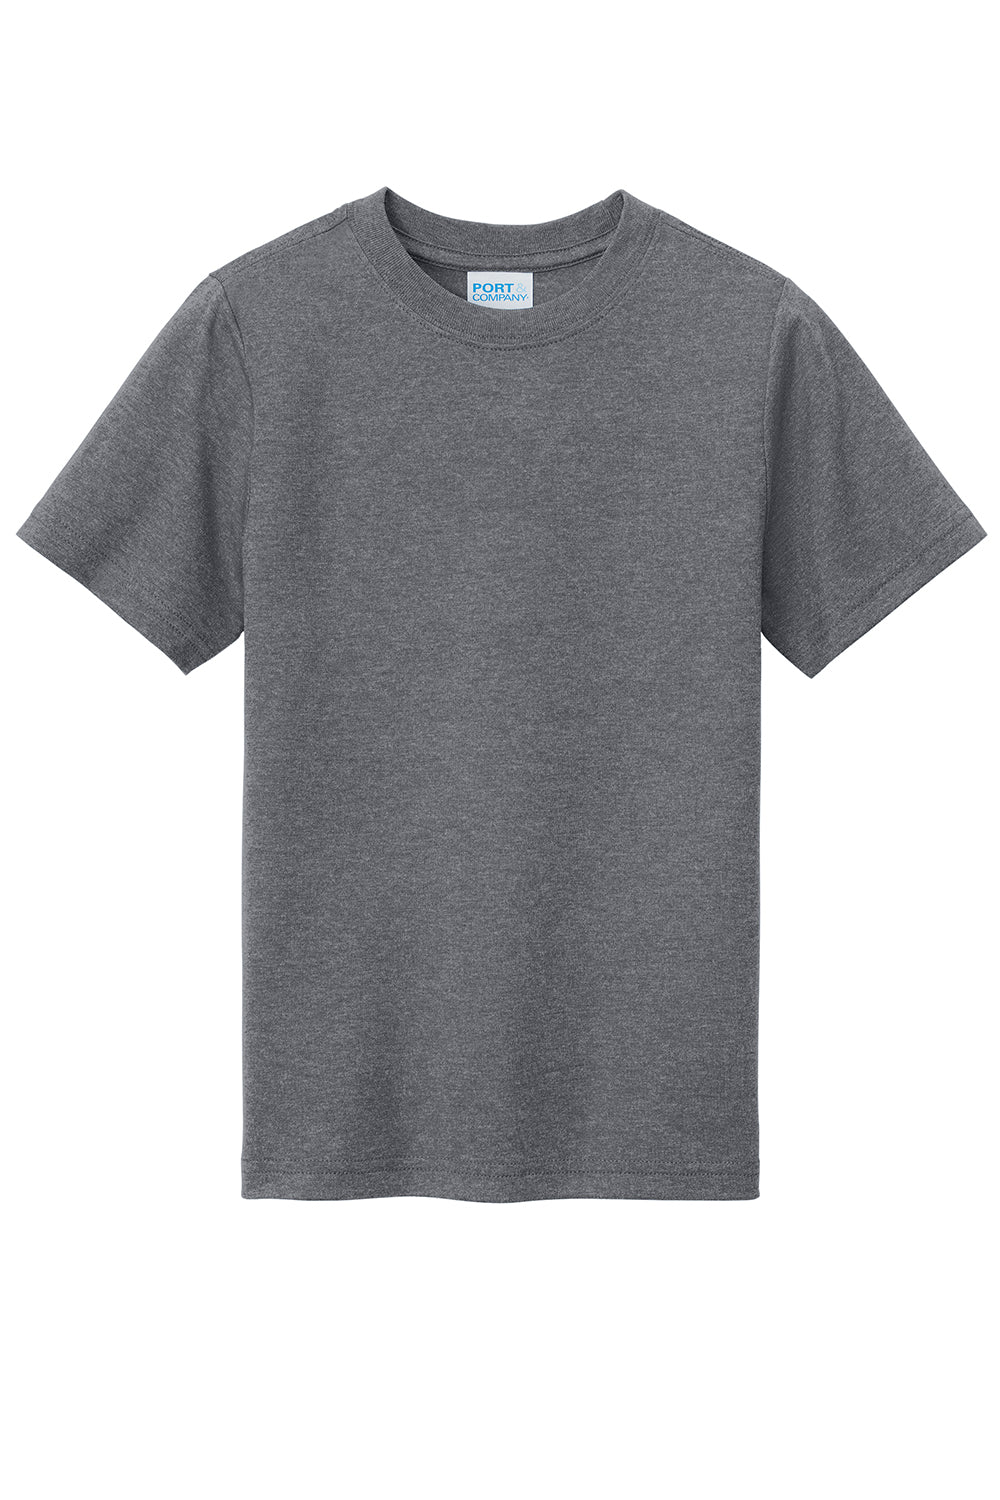 Port & Company PC330Y Youth Short Sleeve Crewneck T-Shirt Heather Graphite Grey Flat Front